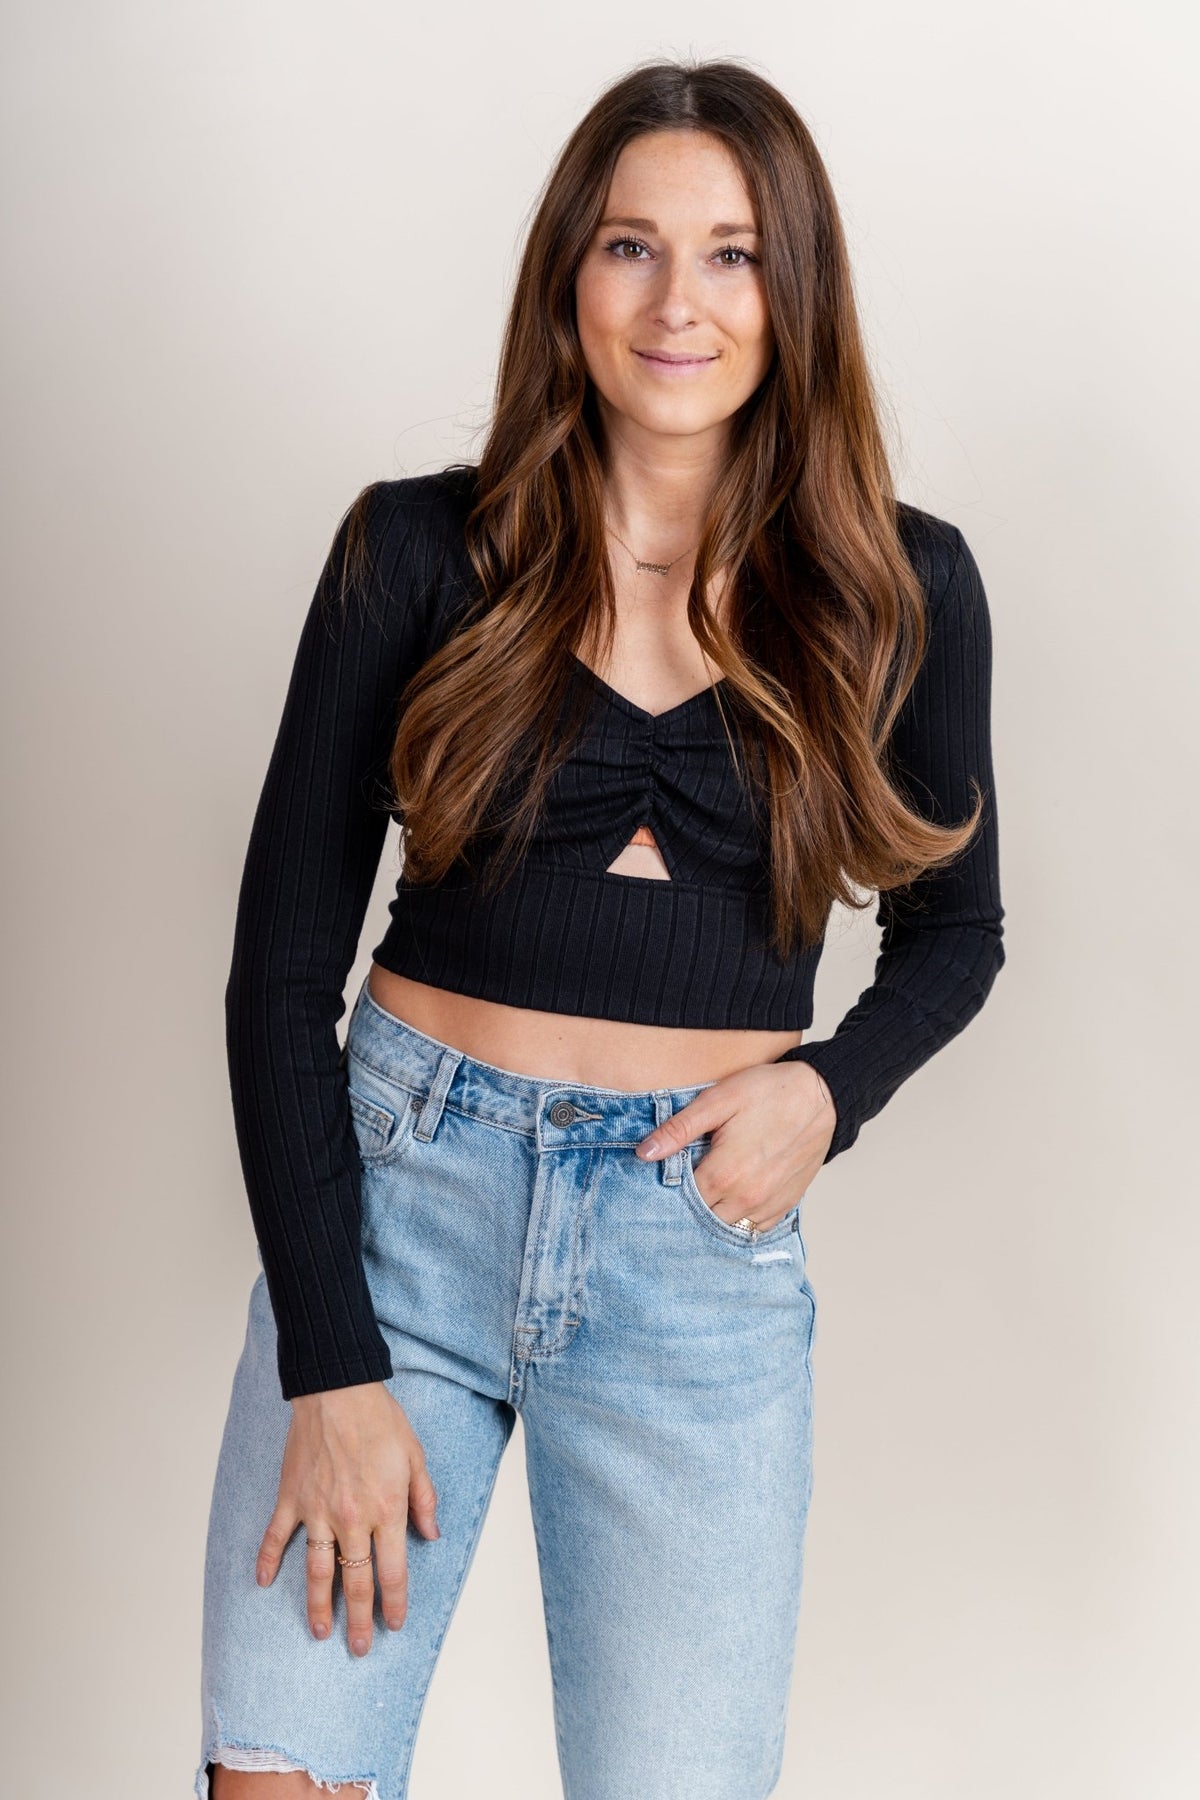 Z Supply Bella ribbed long sleeve top black - Z Supply Top - Z Supply Tops, Dresses, Tanks, Tees, Cardigans, Joggers and Loungewear at Lush Fashion Lounge